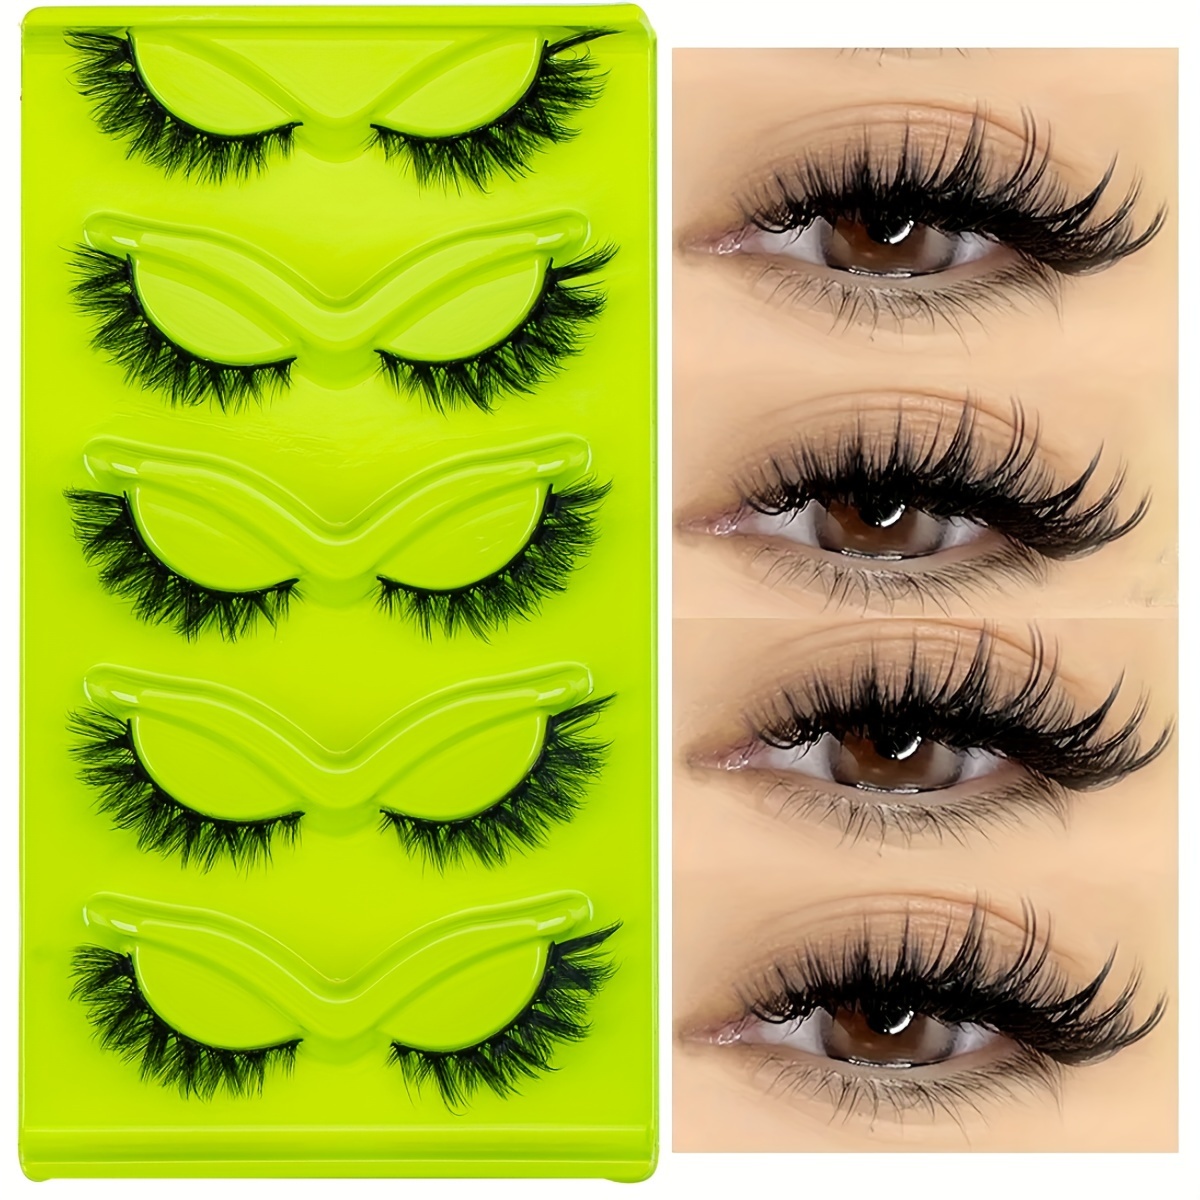 

3d Faux Mink Lashes 5 Pairs Fluffy Winged Lashes Cat Eye Thick Soft Cross Short Natural Full Strip False Eyelashes Makeup